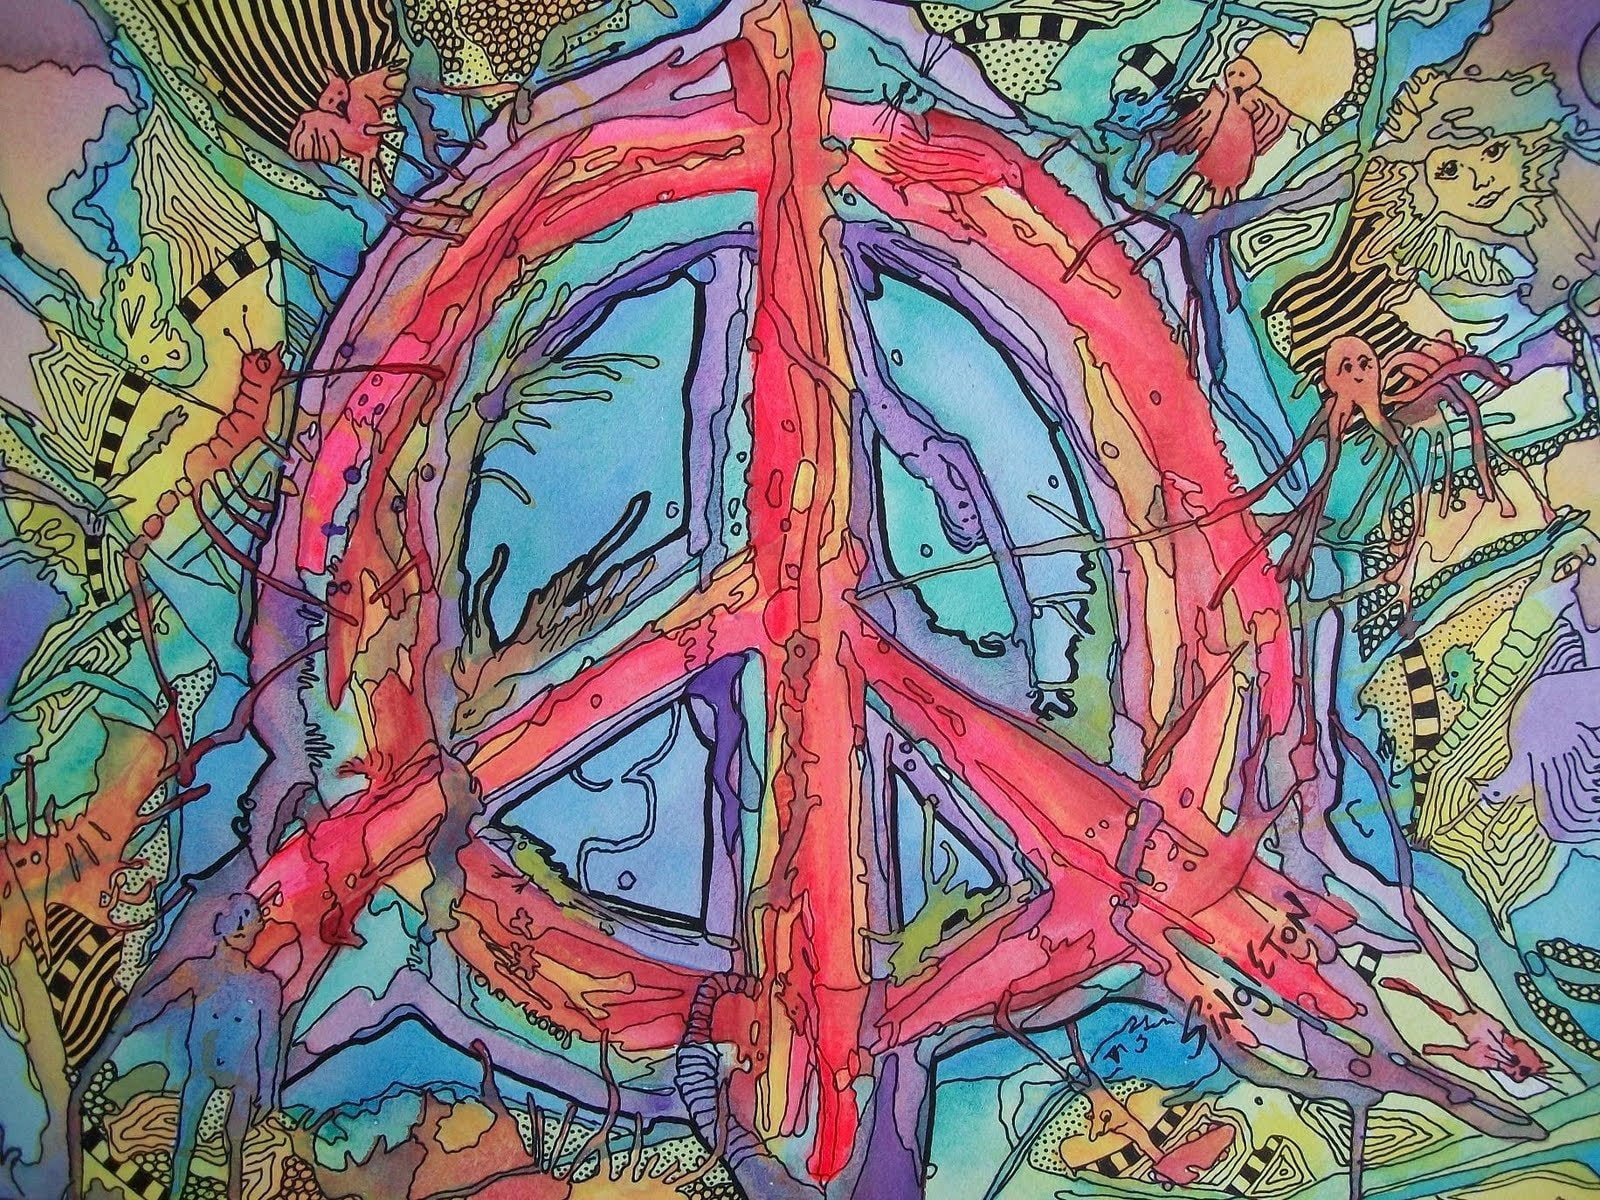 Artistic wallpaper, Psychedelic, Hippie, Peace Sign, Trippy.